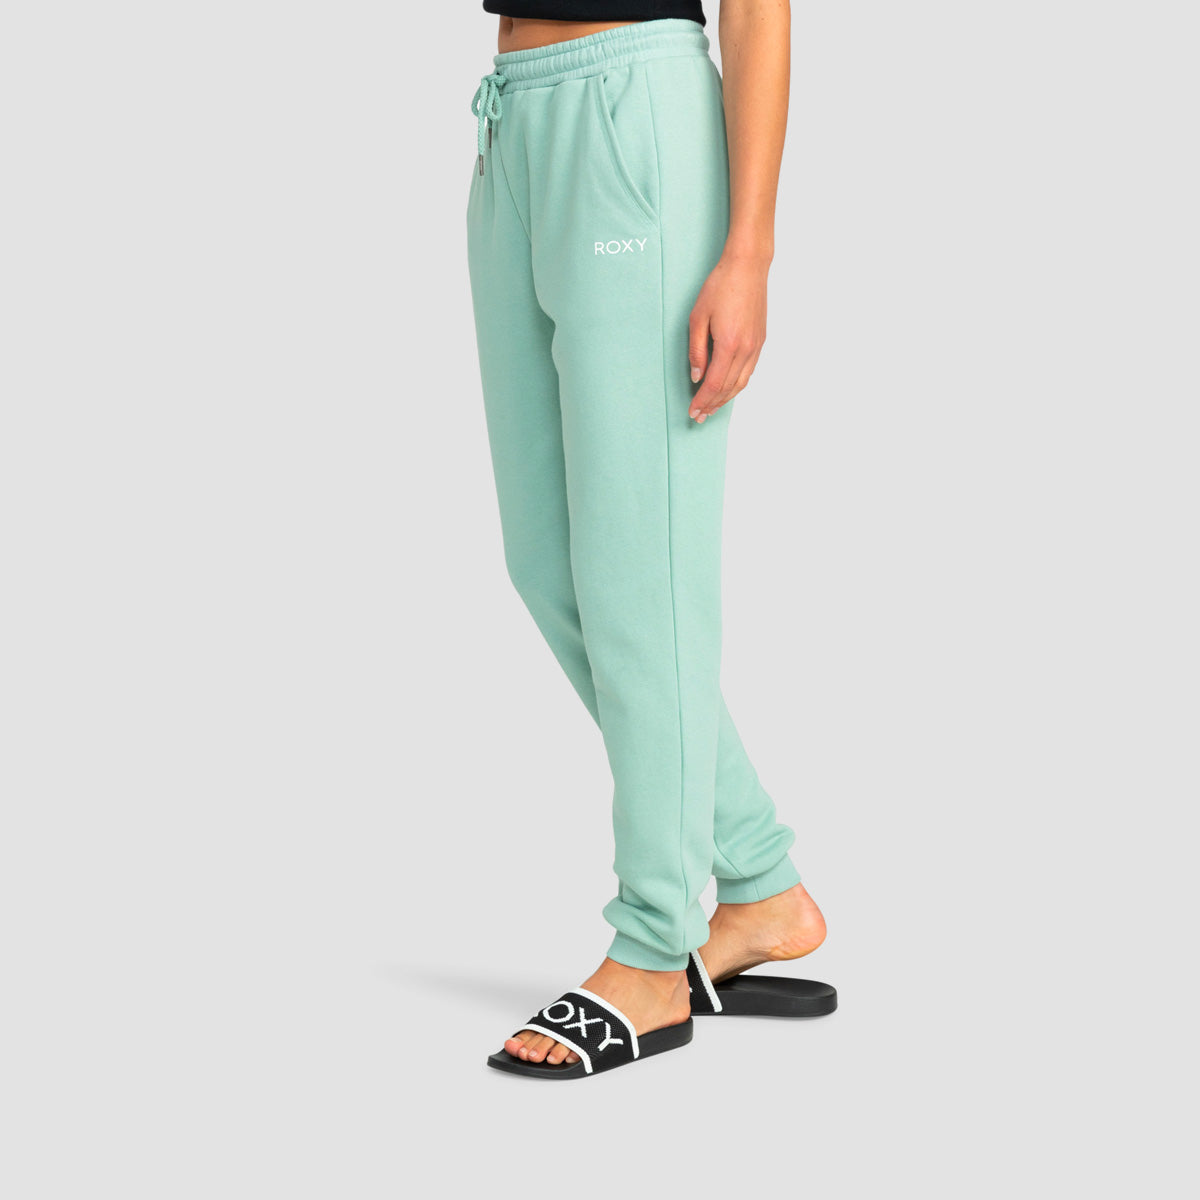 Roxy From Home Sweatpants Blue Surf - Womens